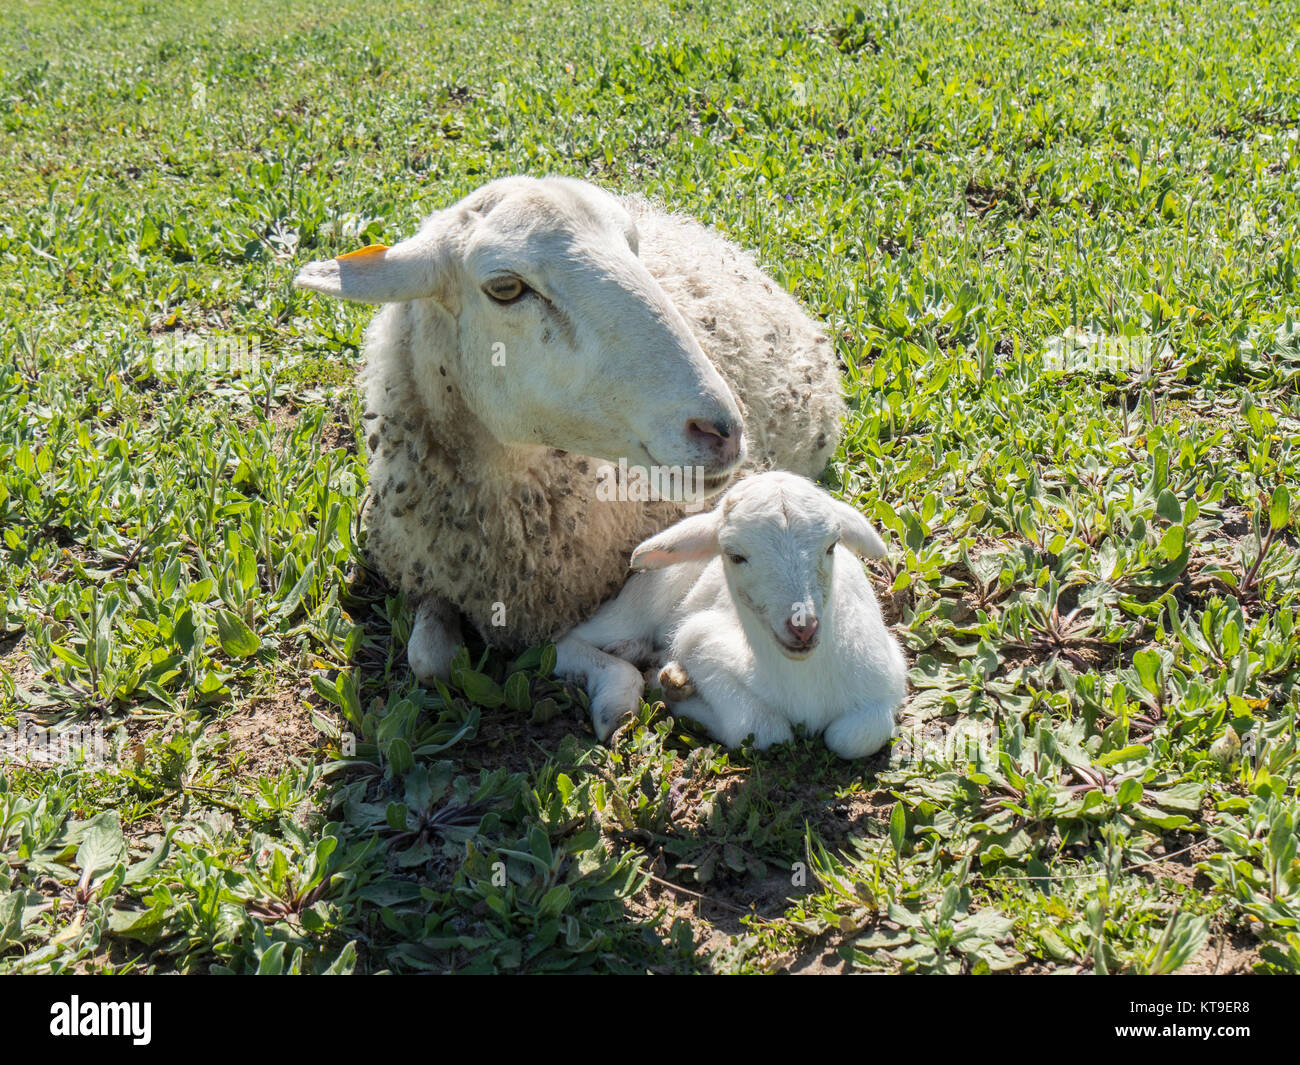 Flock of sheep in the field Stock Photo